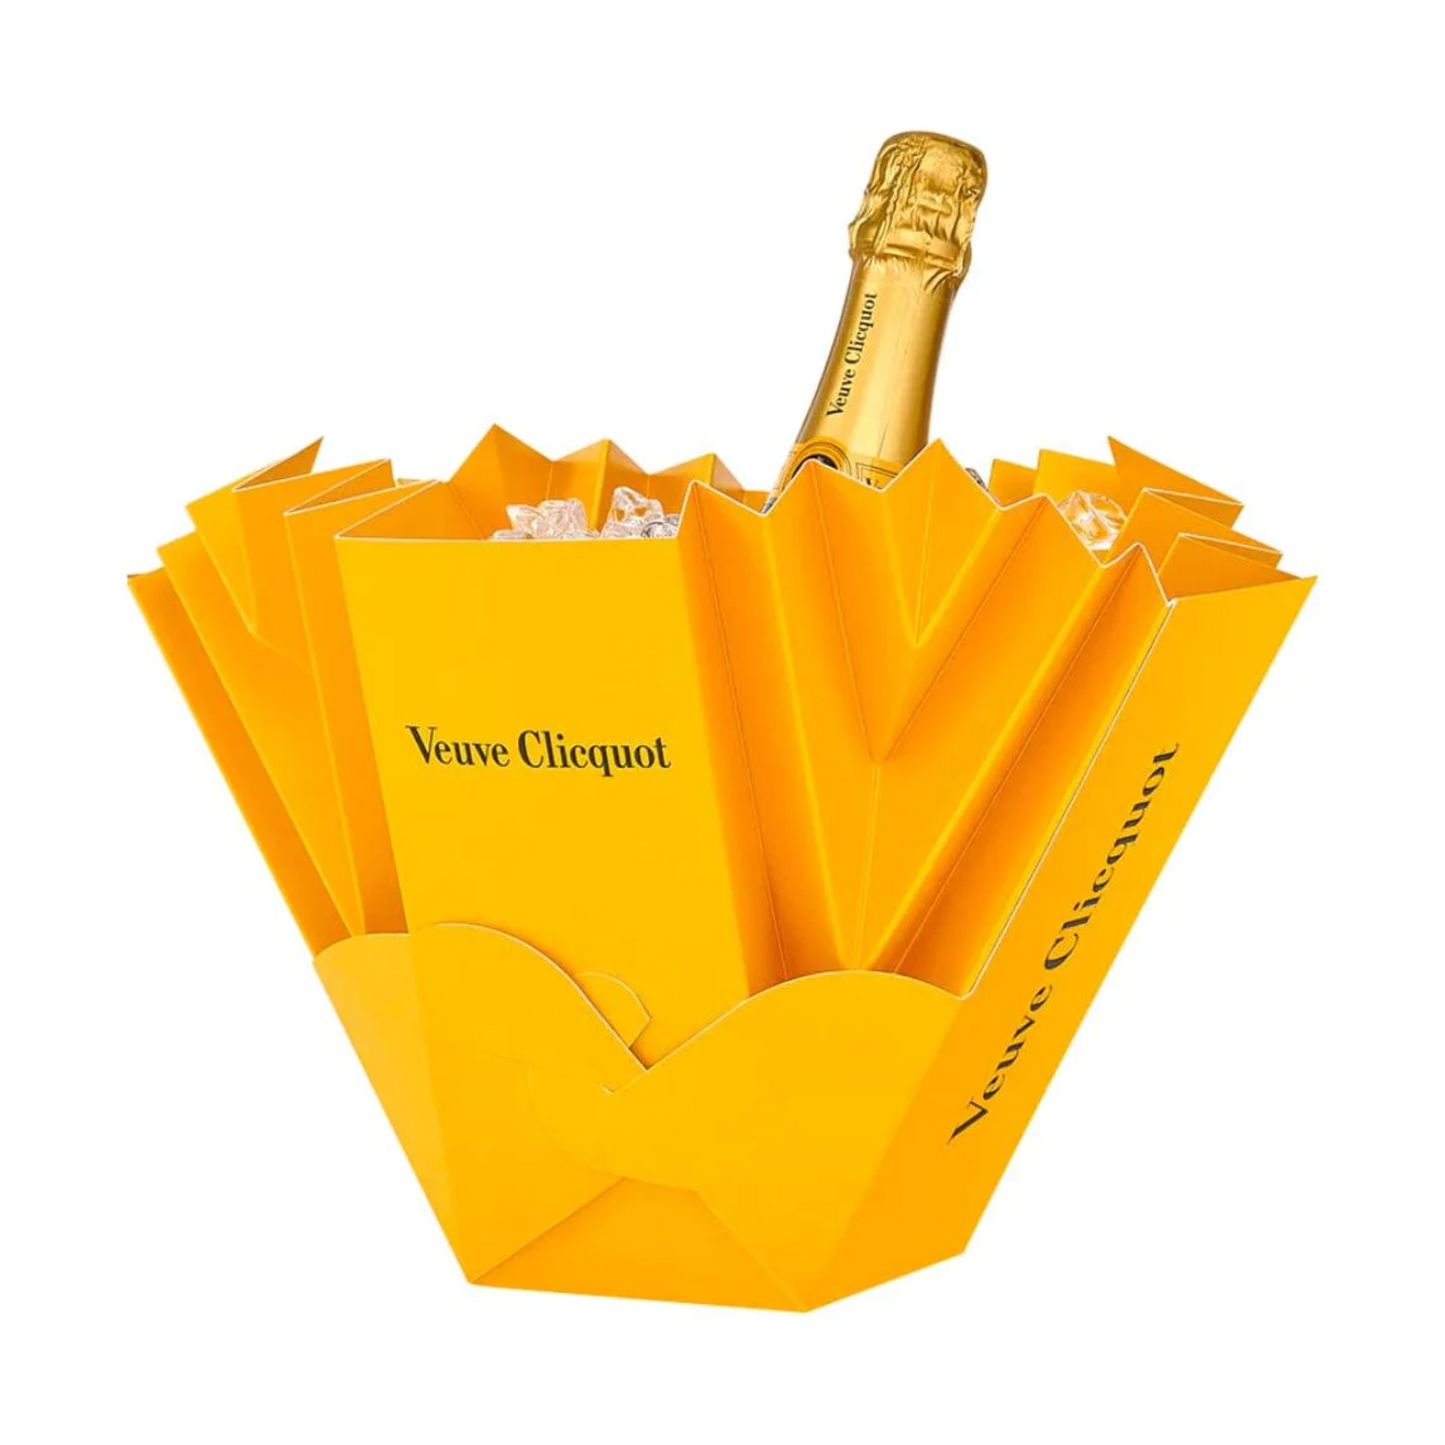 Veuve Clicquot Champagne Brut With Ice Box Gift Box - Liquor Geeks